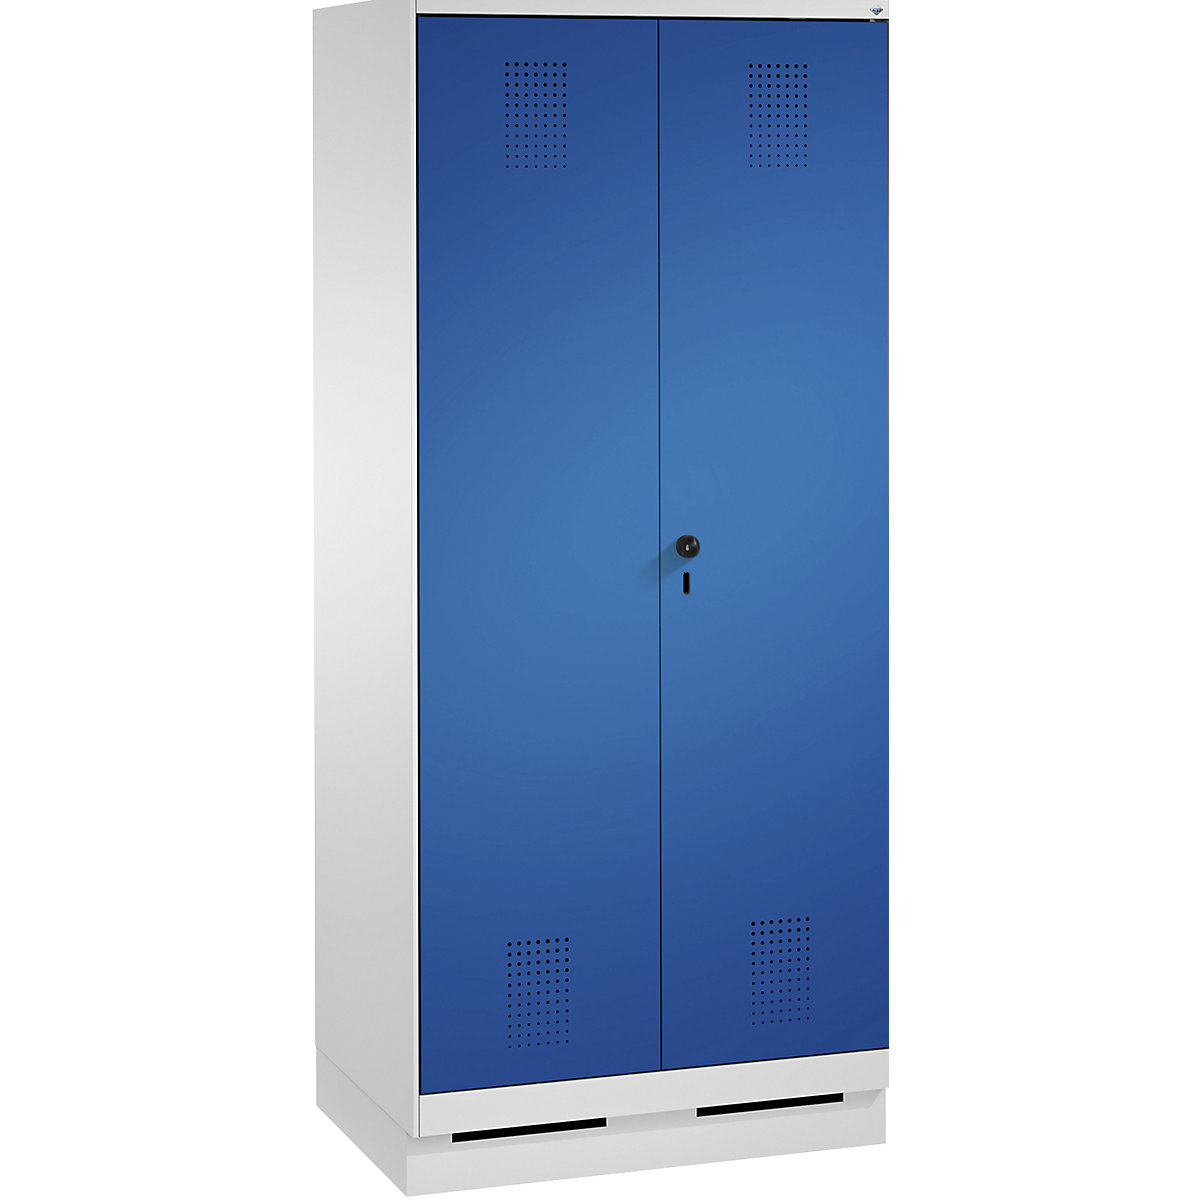 EVOLO laundry cupboard / cloakroom locker – C+P, 4 shelves, clothes rail, compartments 2 x 400 mm, with plinth, light grey / gentian blue-4